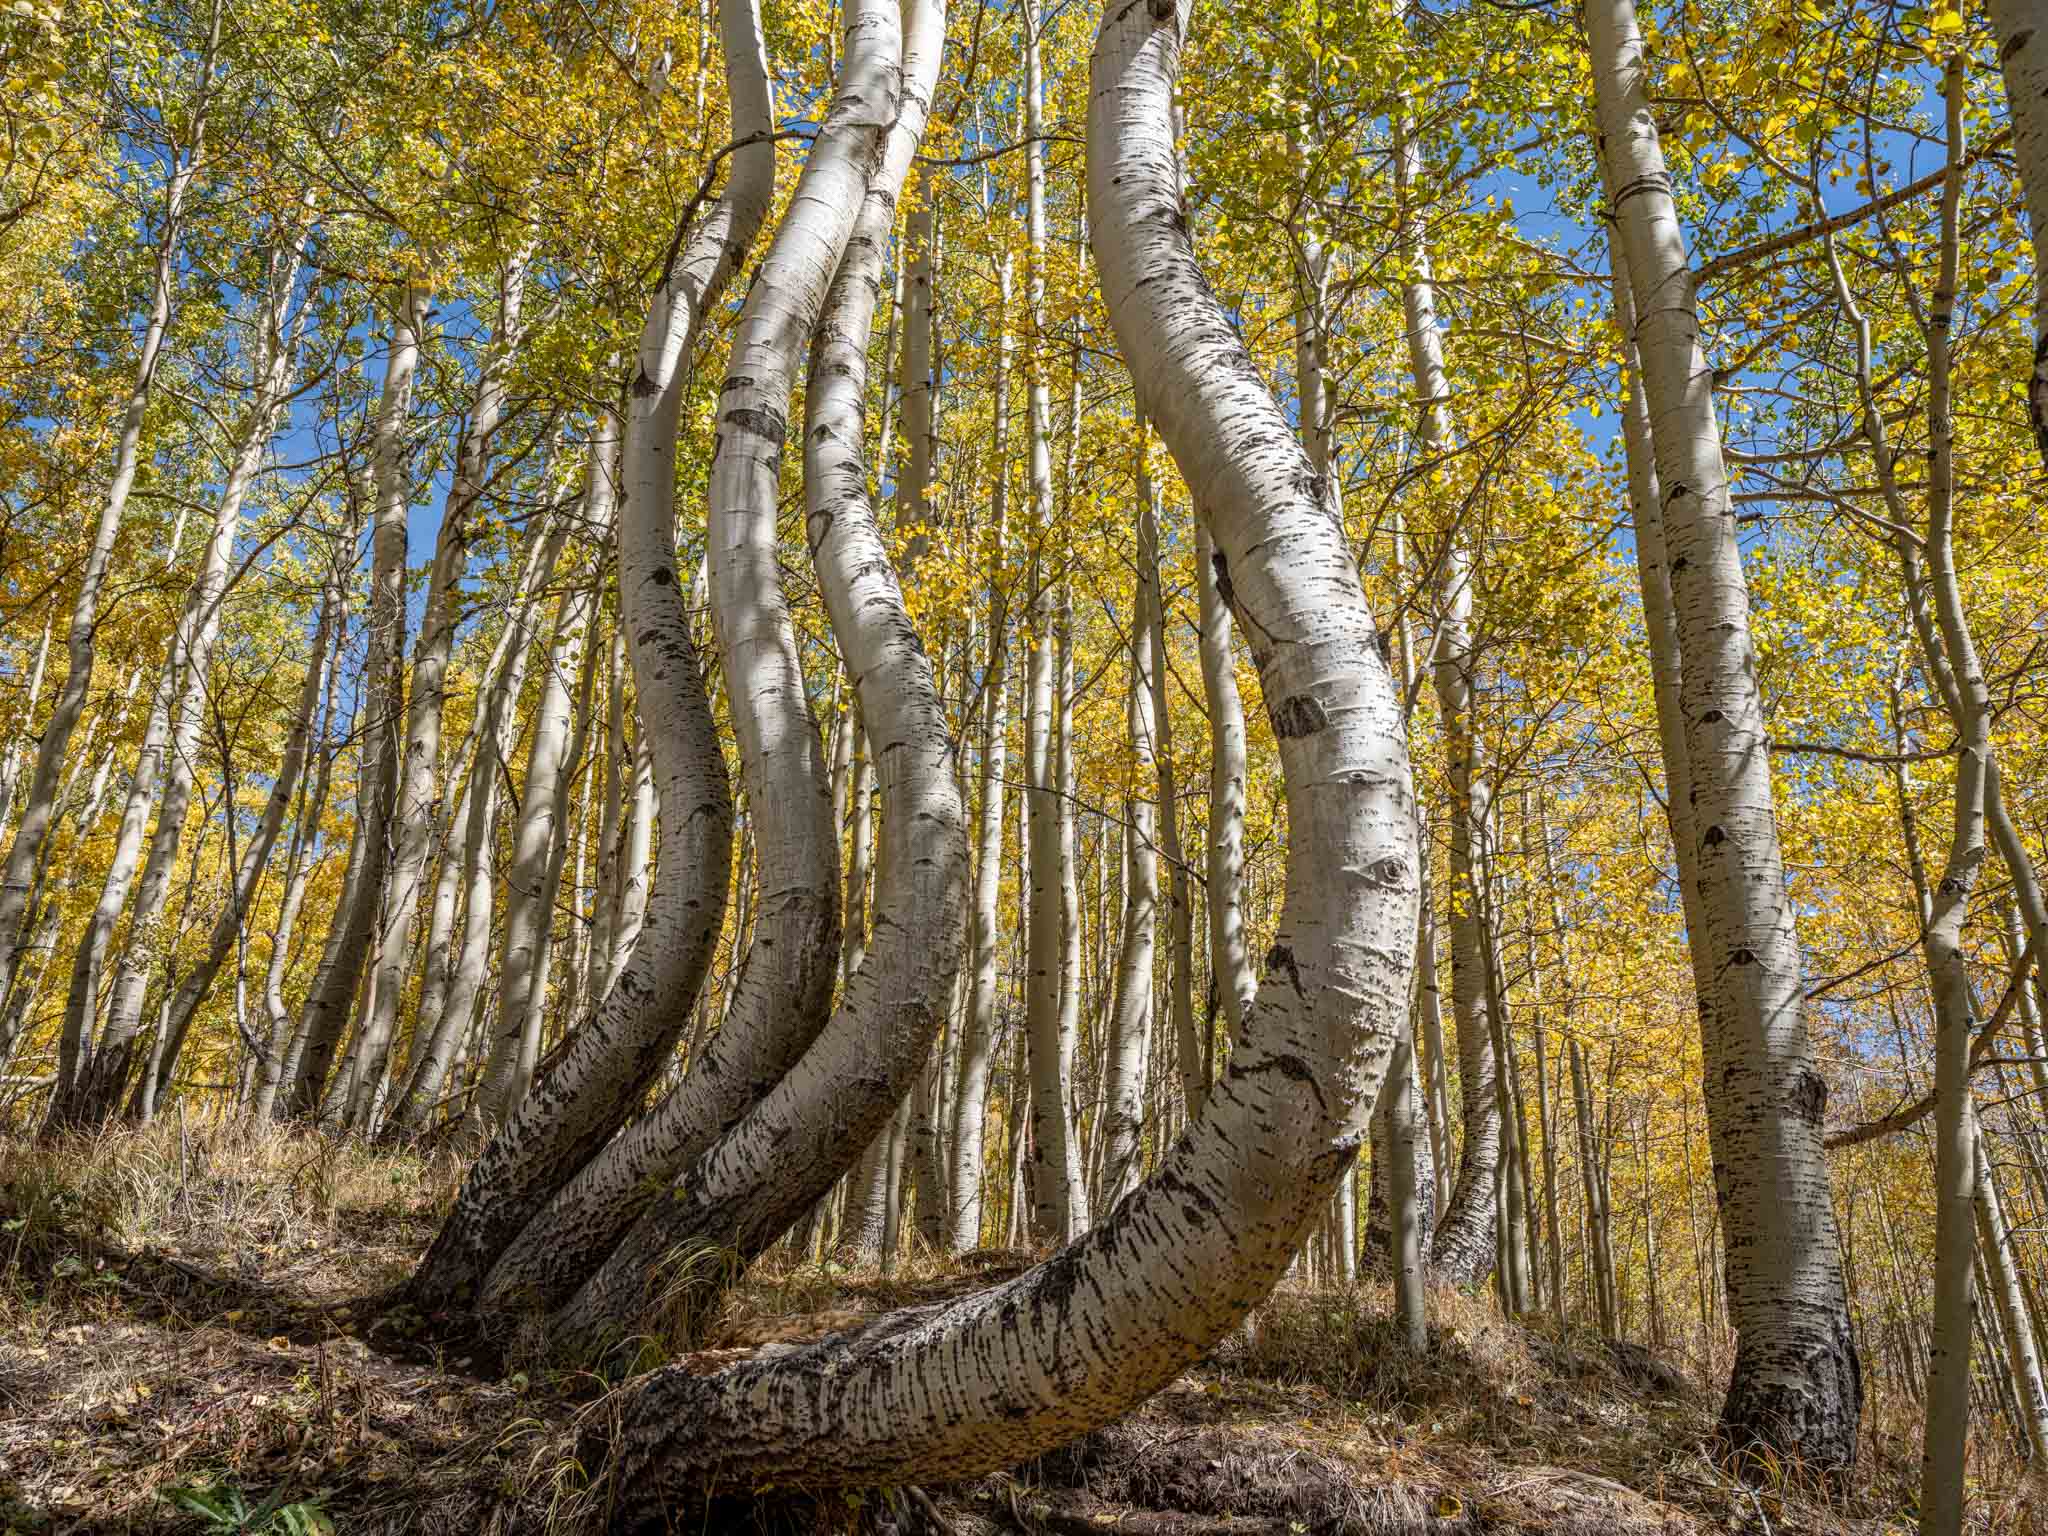 a group of trees with twisted trunks